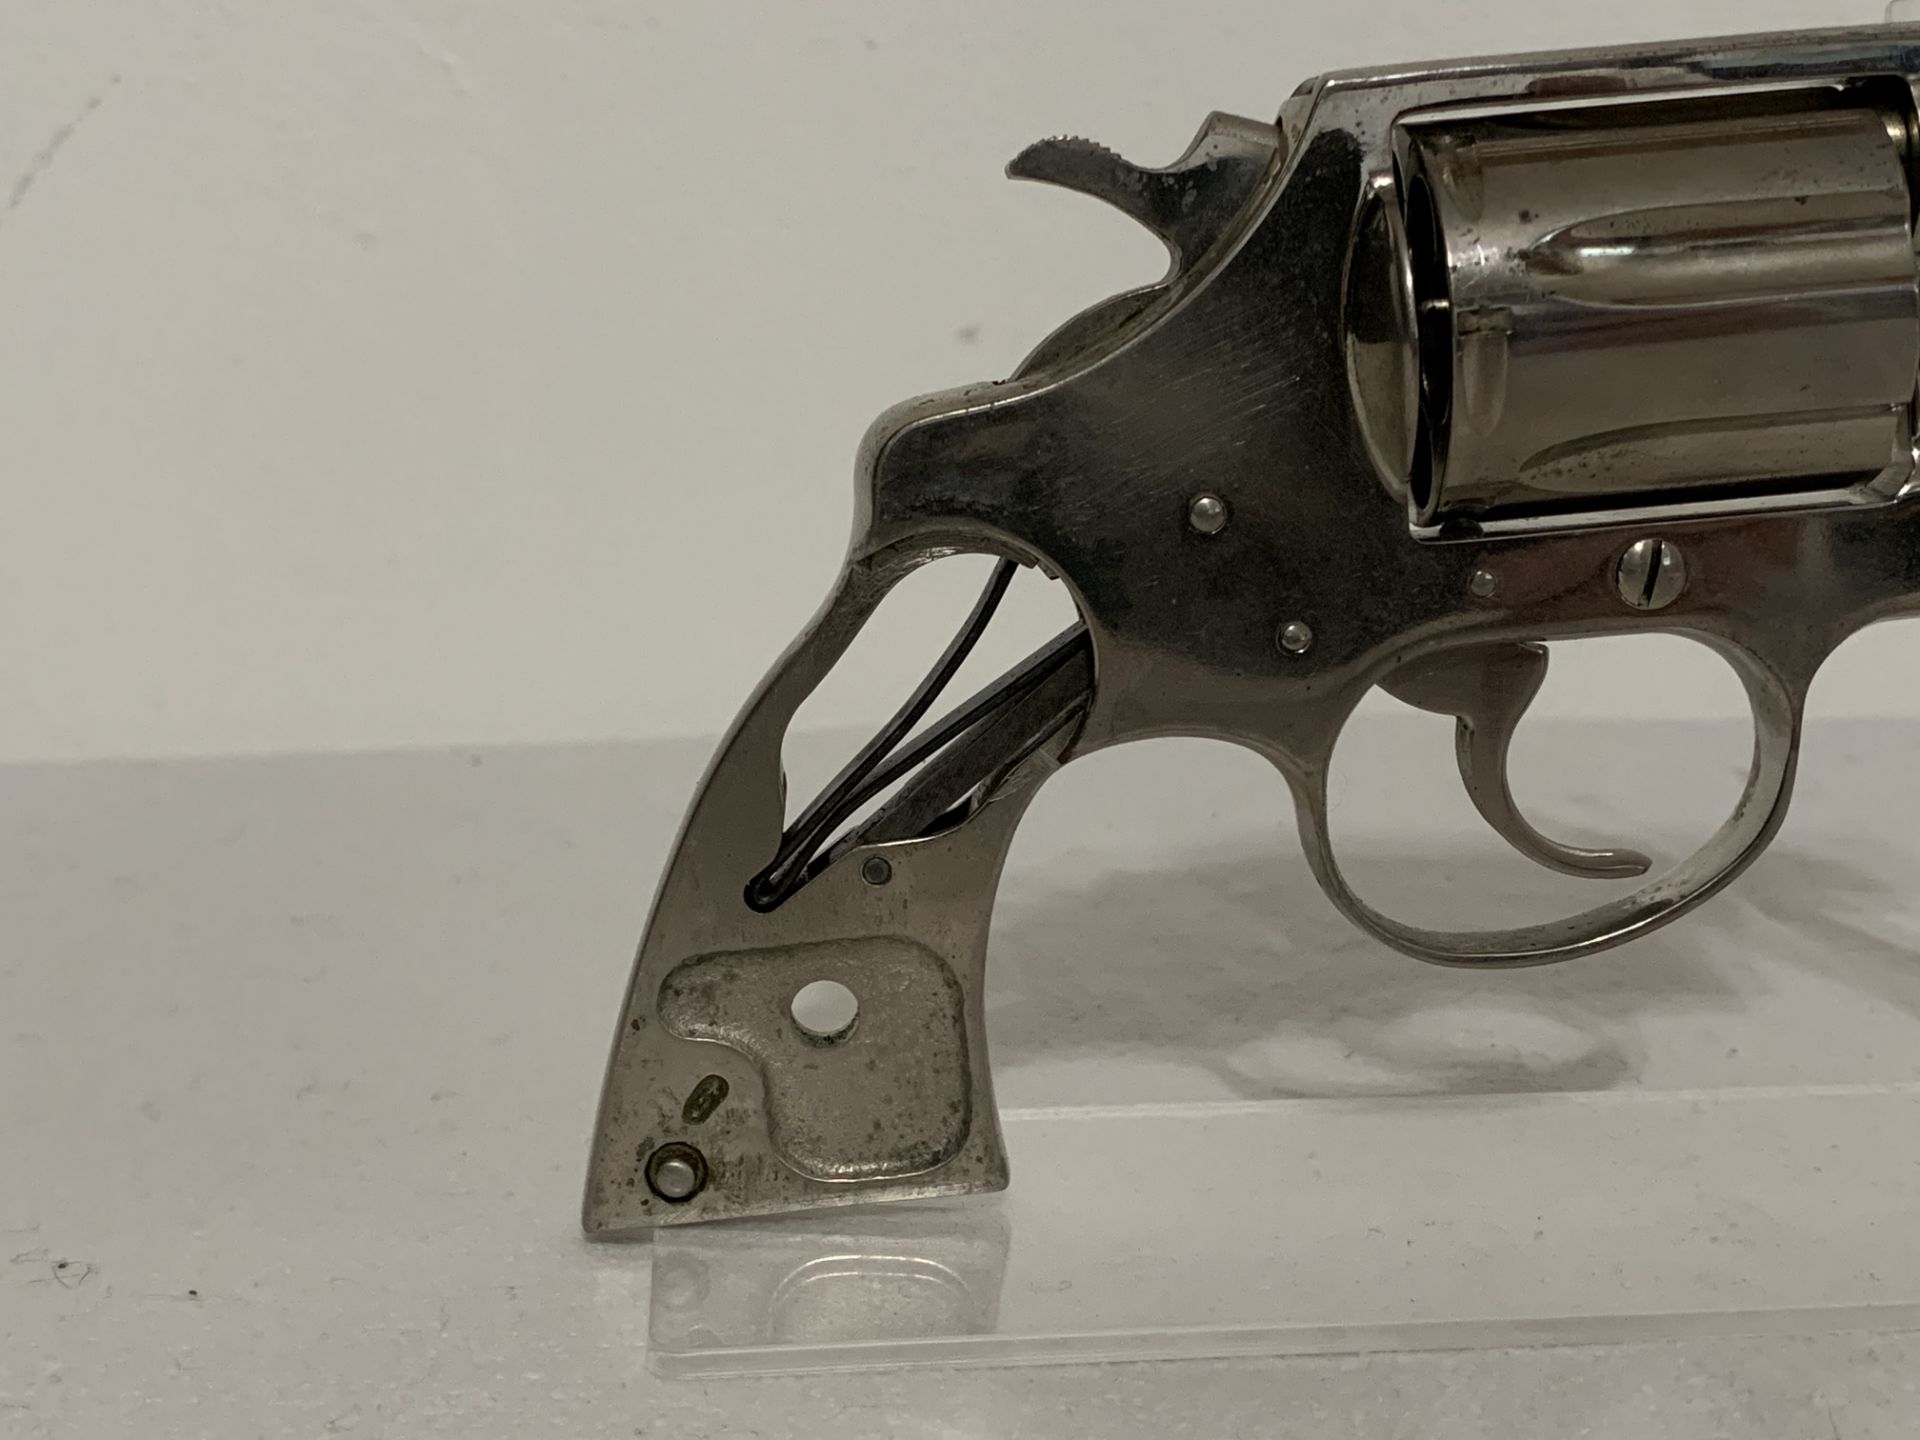 COLT DETECTIVE SPECIAL PISTOL - 38 CAL - NICKEL - WITH ORIGINAL 1971 GRIPS (FOB HOLLYWOOD, FL) - Image 10 of 11